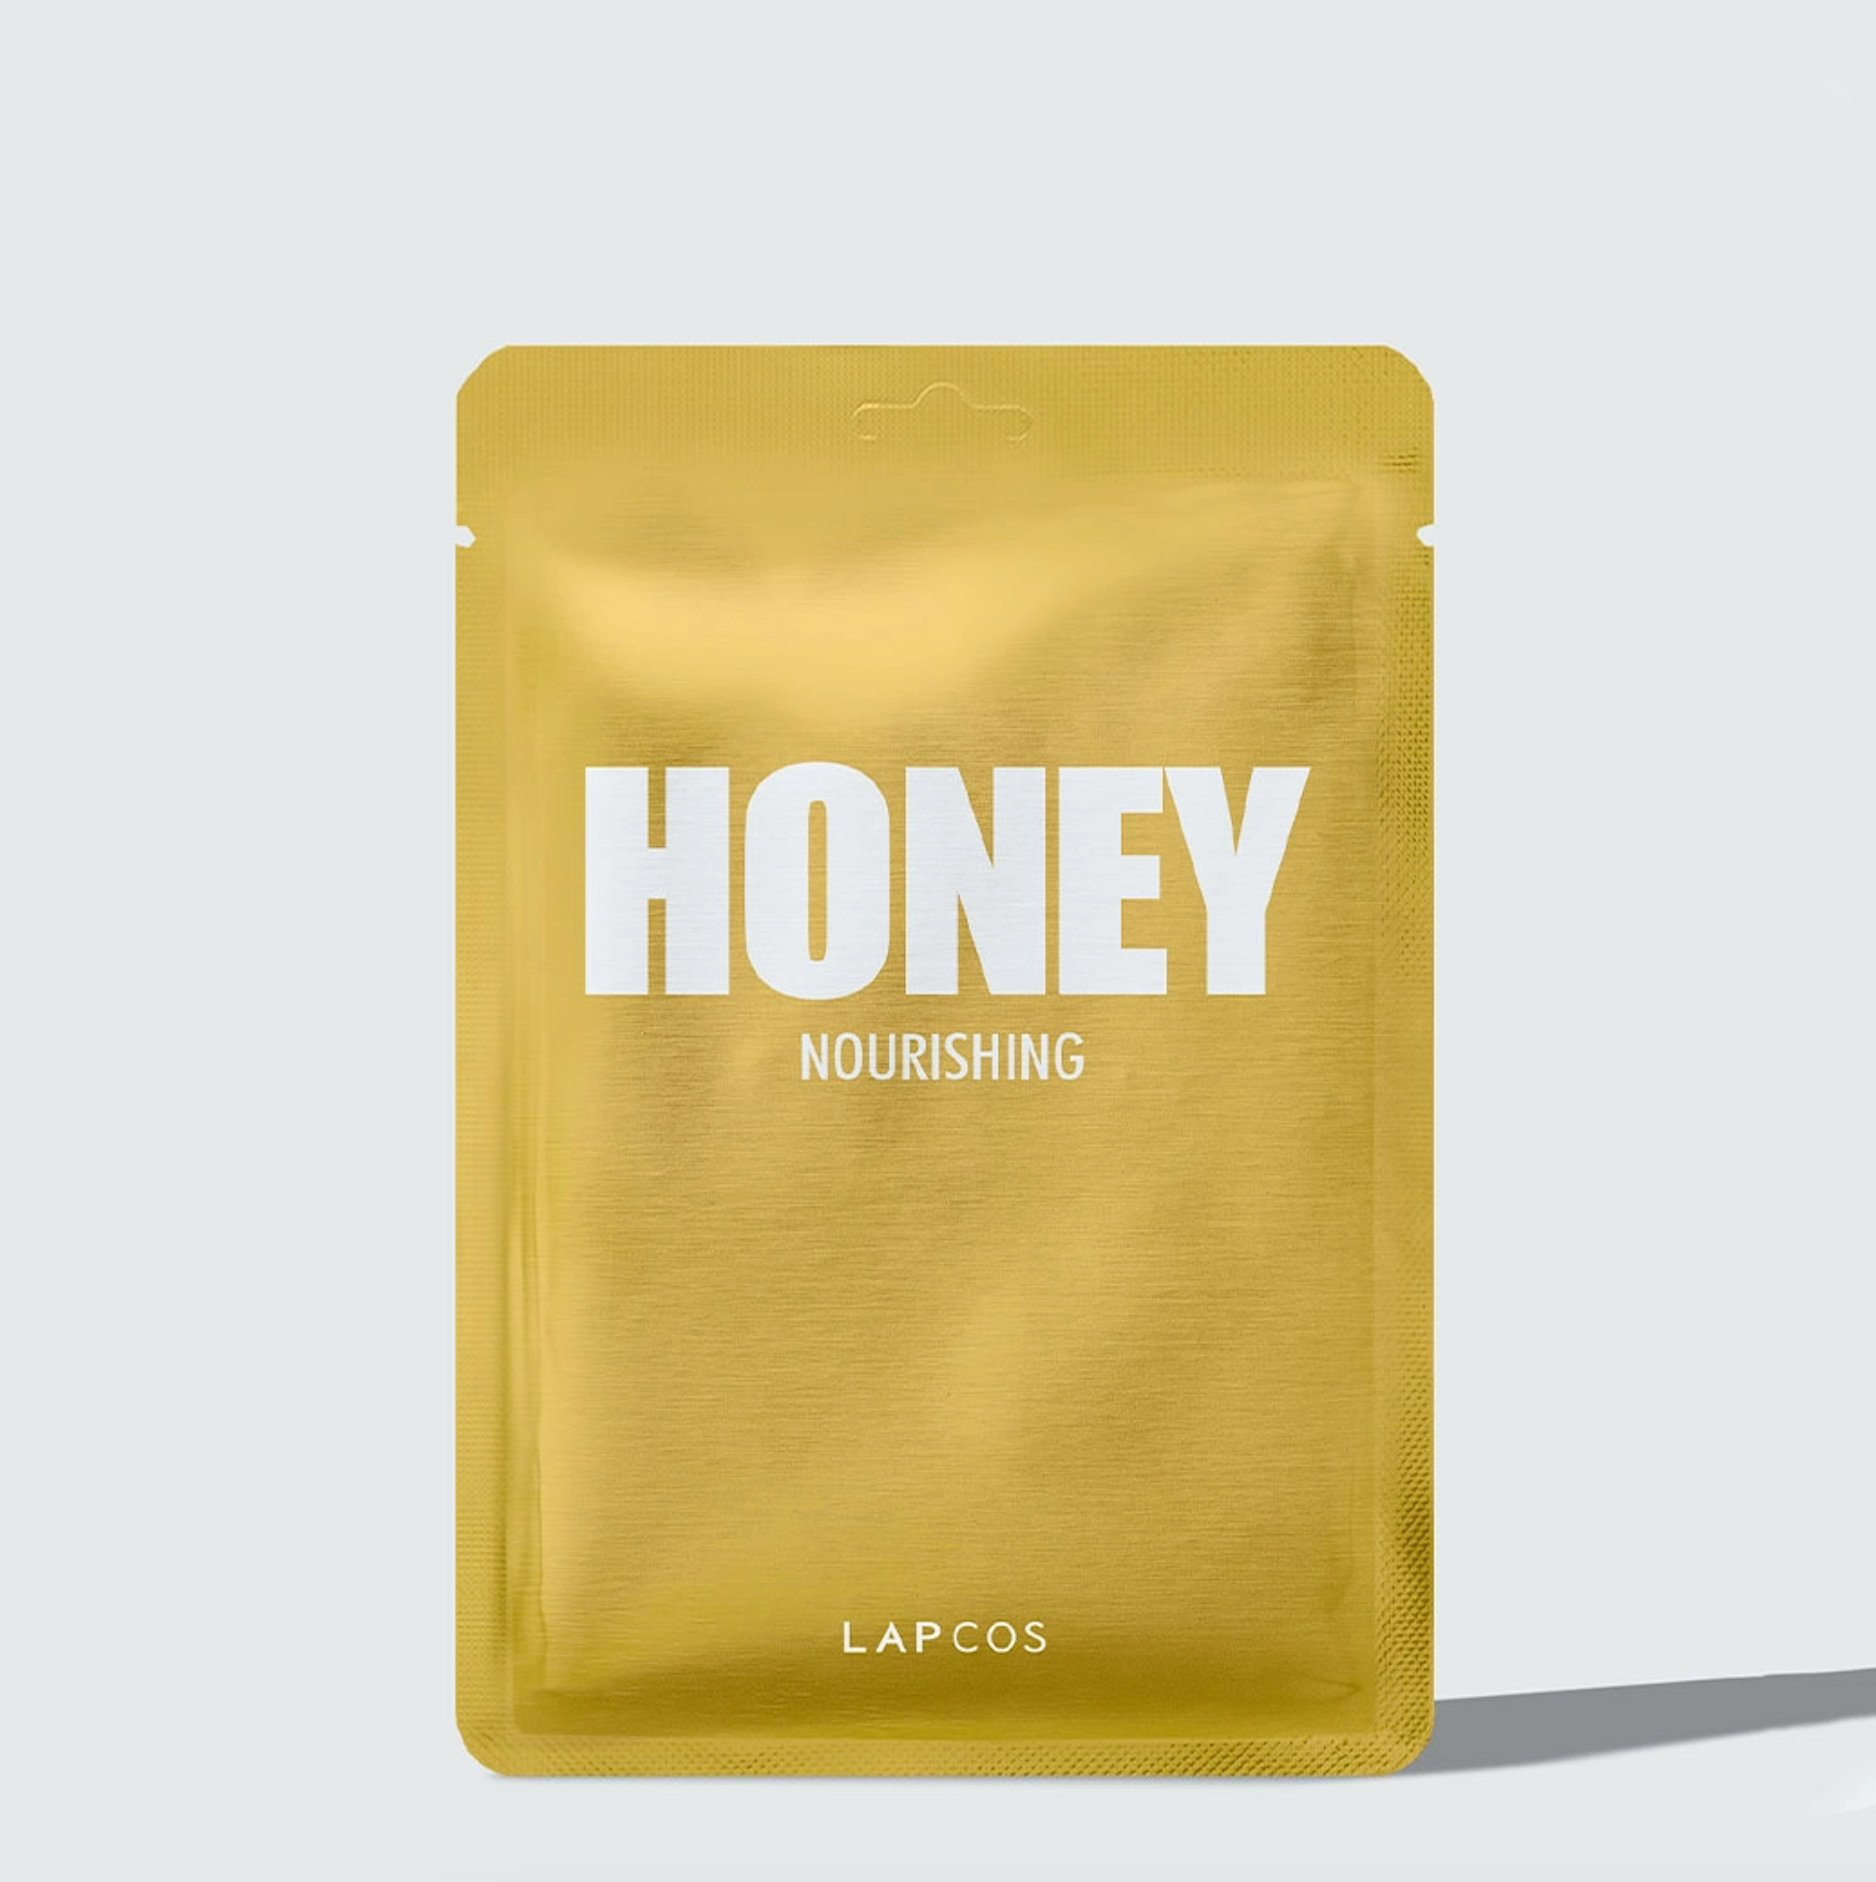 a packet of honey nourishing on a white background